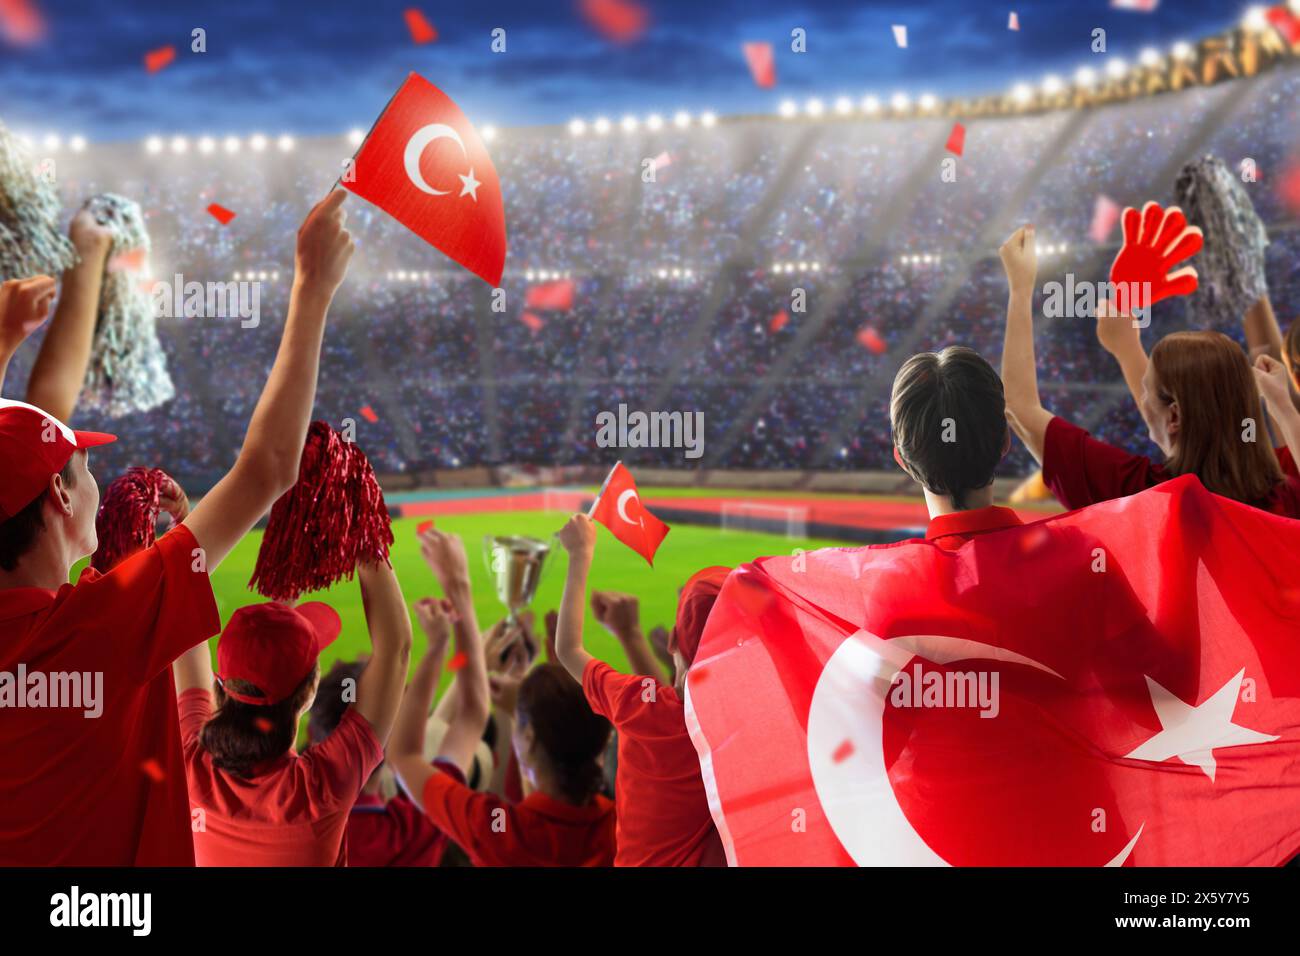 Turkey football supporter on stadium. Turkish fans on soccer pitch watching team play. Group of supporters with Turkiye flag and national jersey cheer Stock Photo